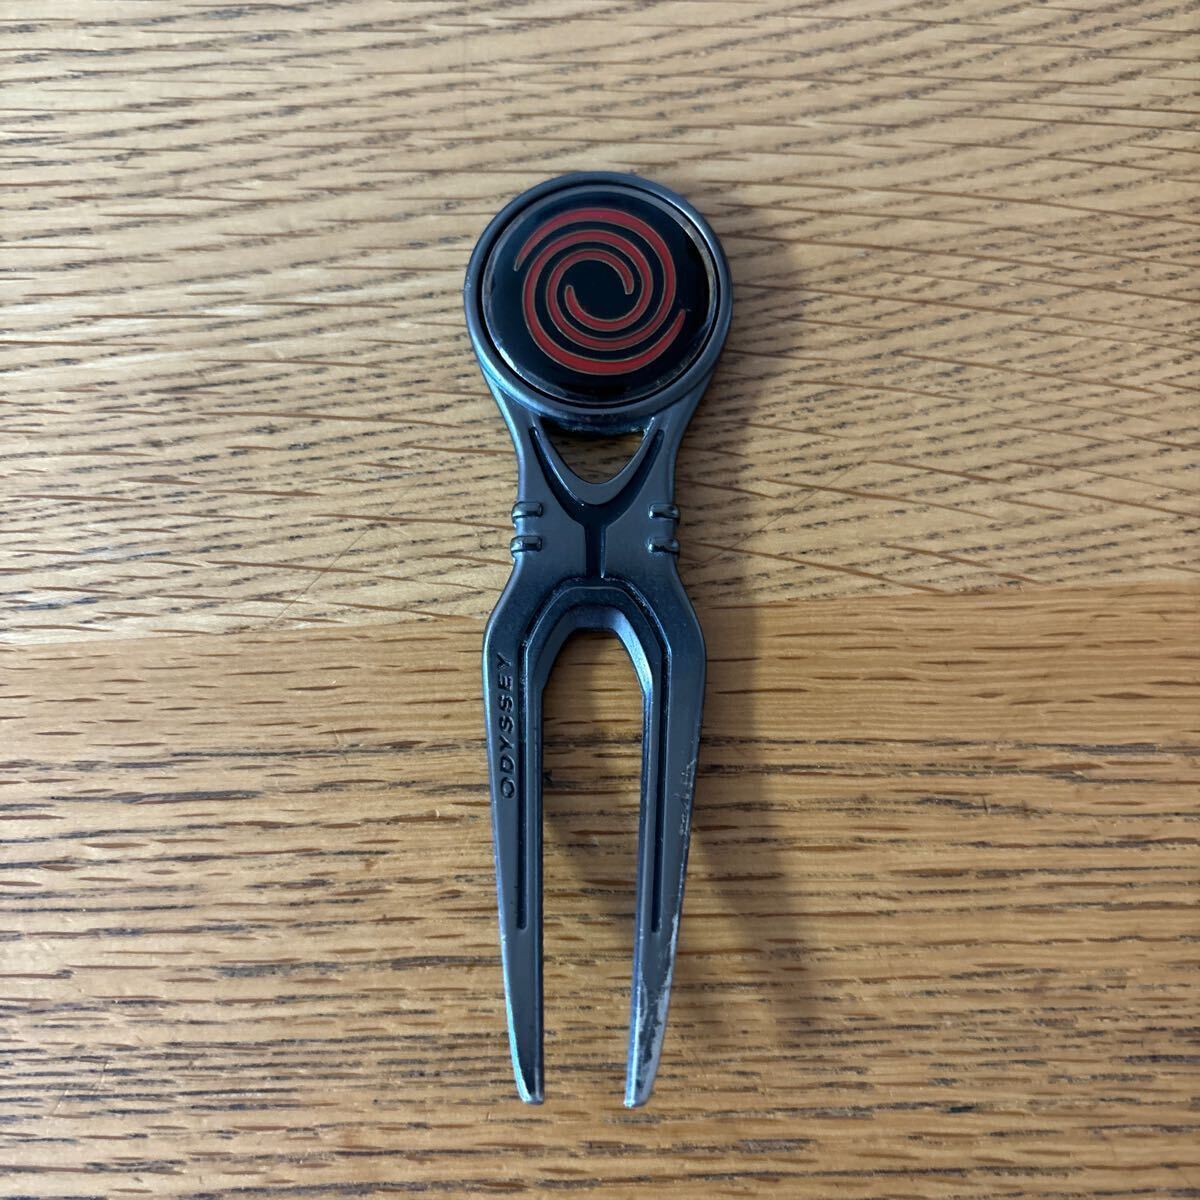  Odyssey marker attaching green Fork gunmetal × black × red including carriage 